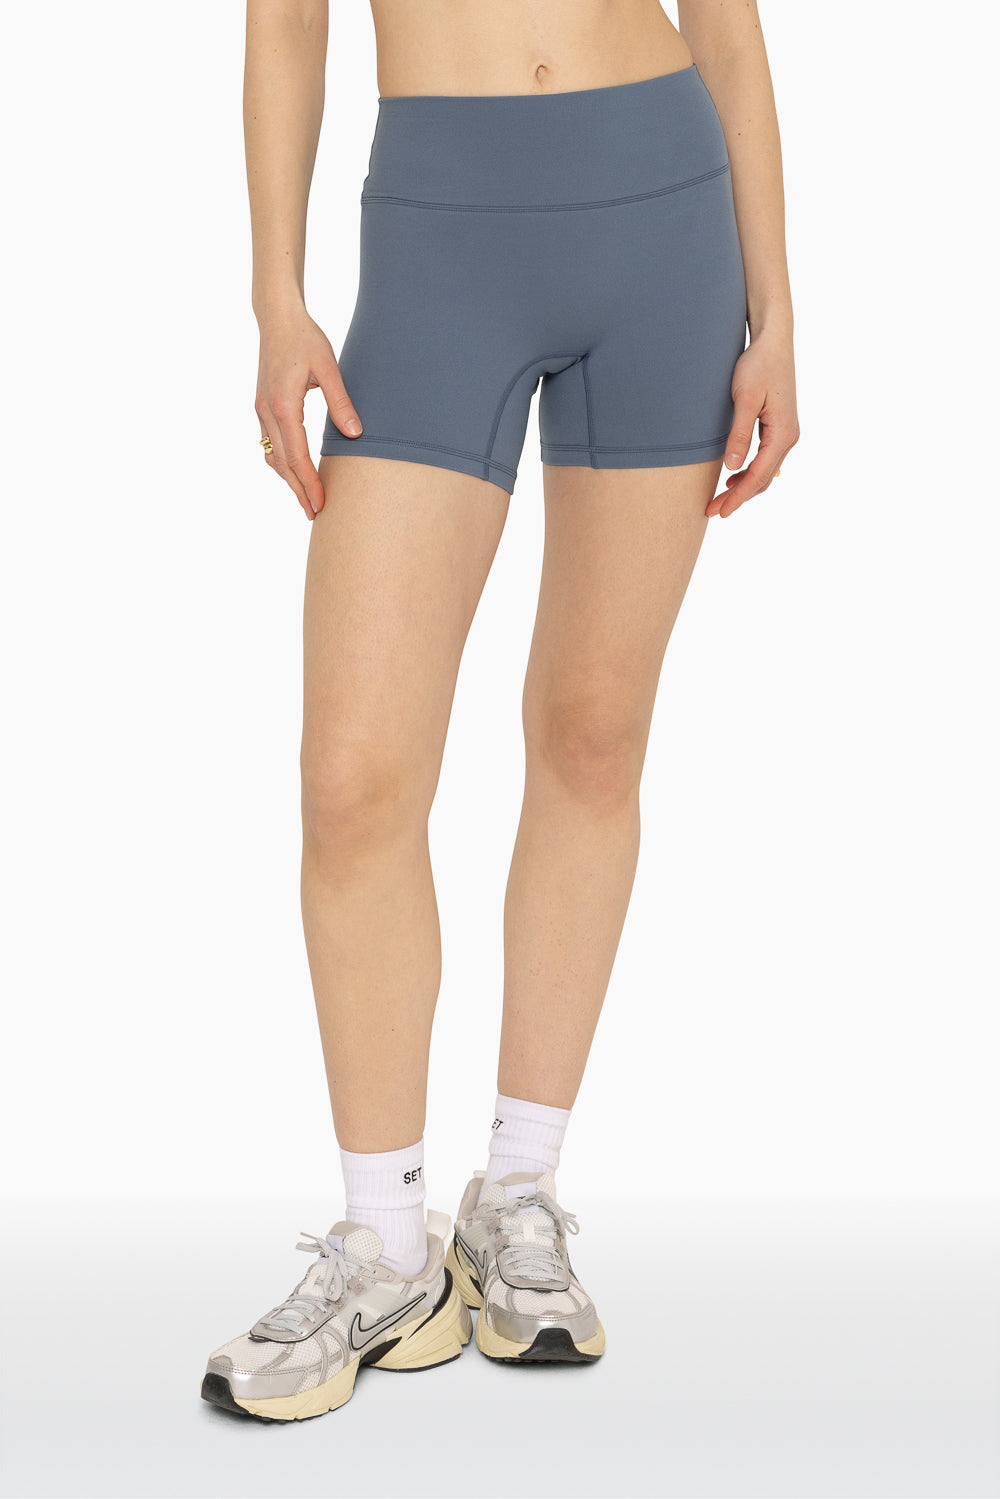 FORMCLOUD™ BIKE SHORTS - MINERAL Featured Image